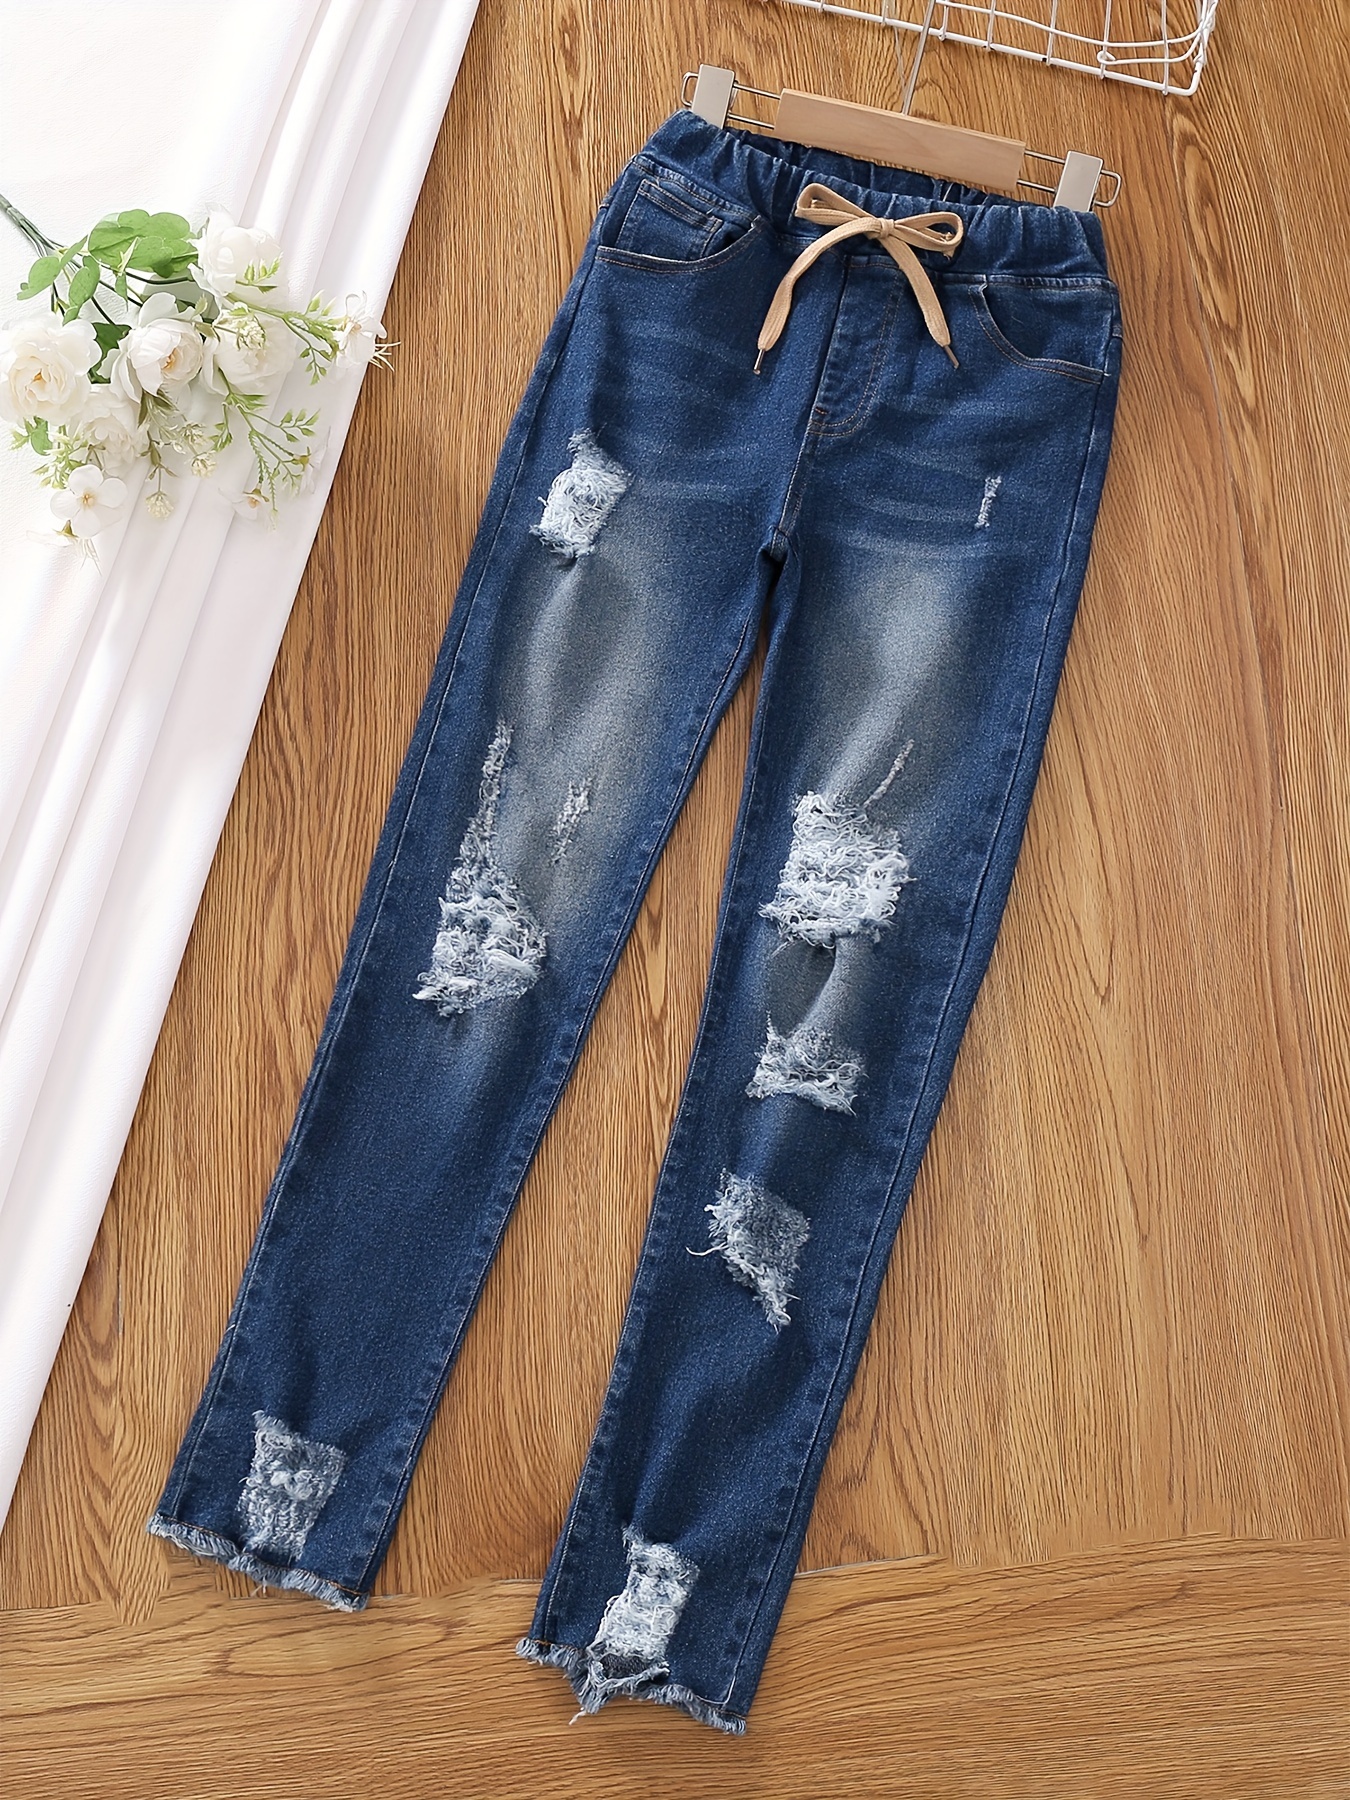 Wholesale Jeans For Girls Elegant Bow Cute Denim Pants Sweet Stretch Lovely  Spring Child Trousers Toddler Kids Baby Streetwear 312T From malibabacom